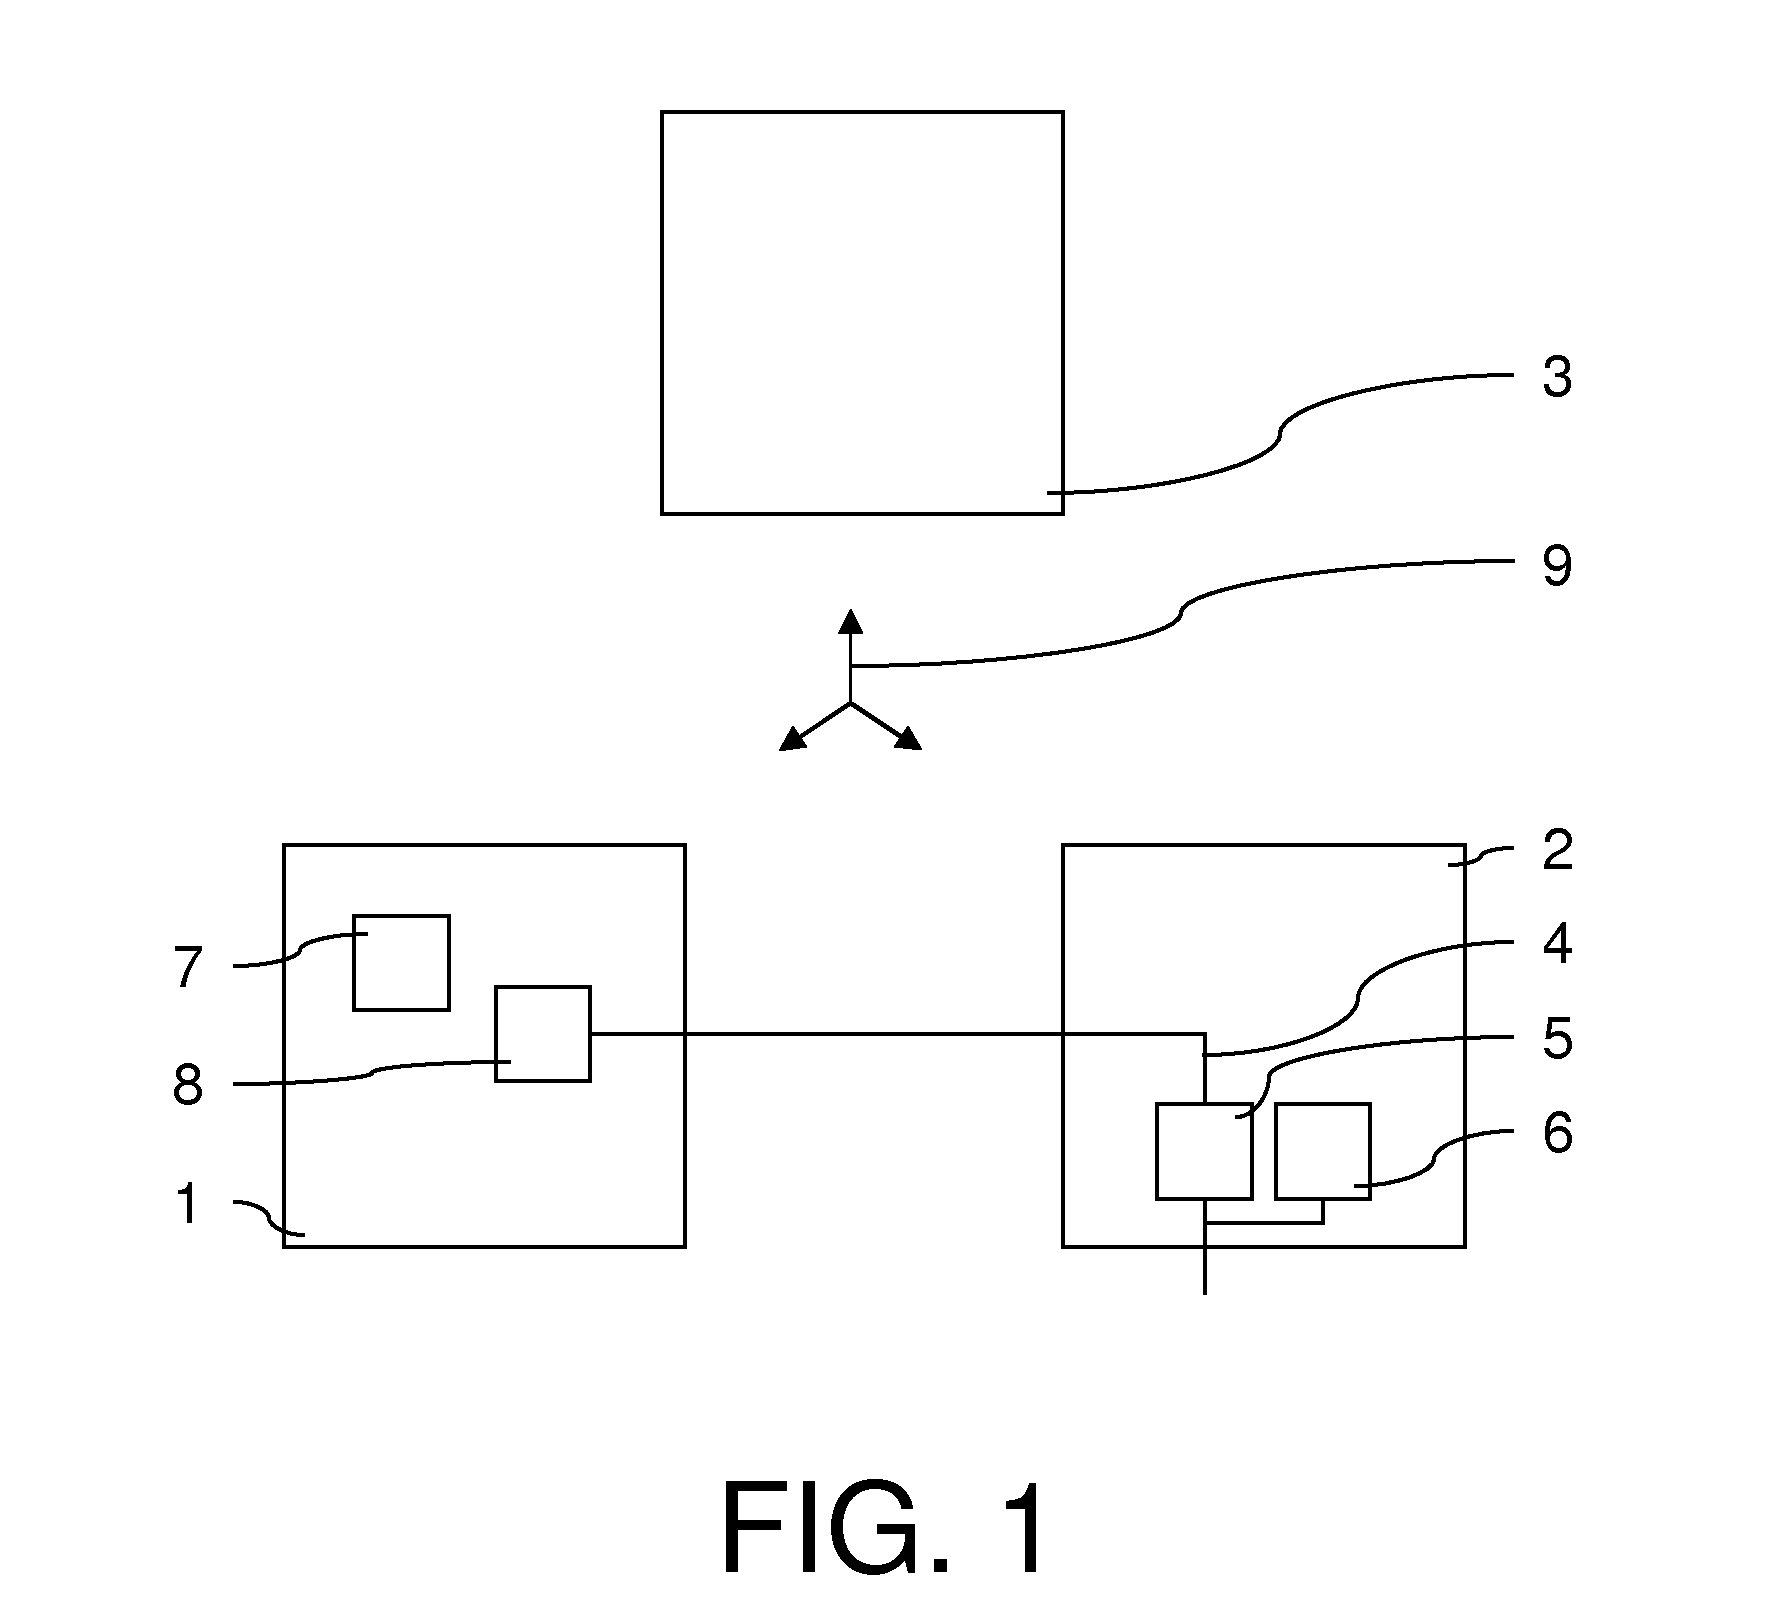 Control system for controlling a process